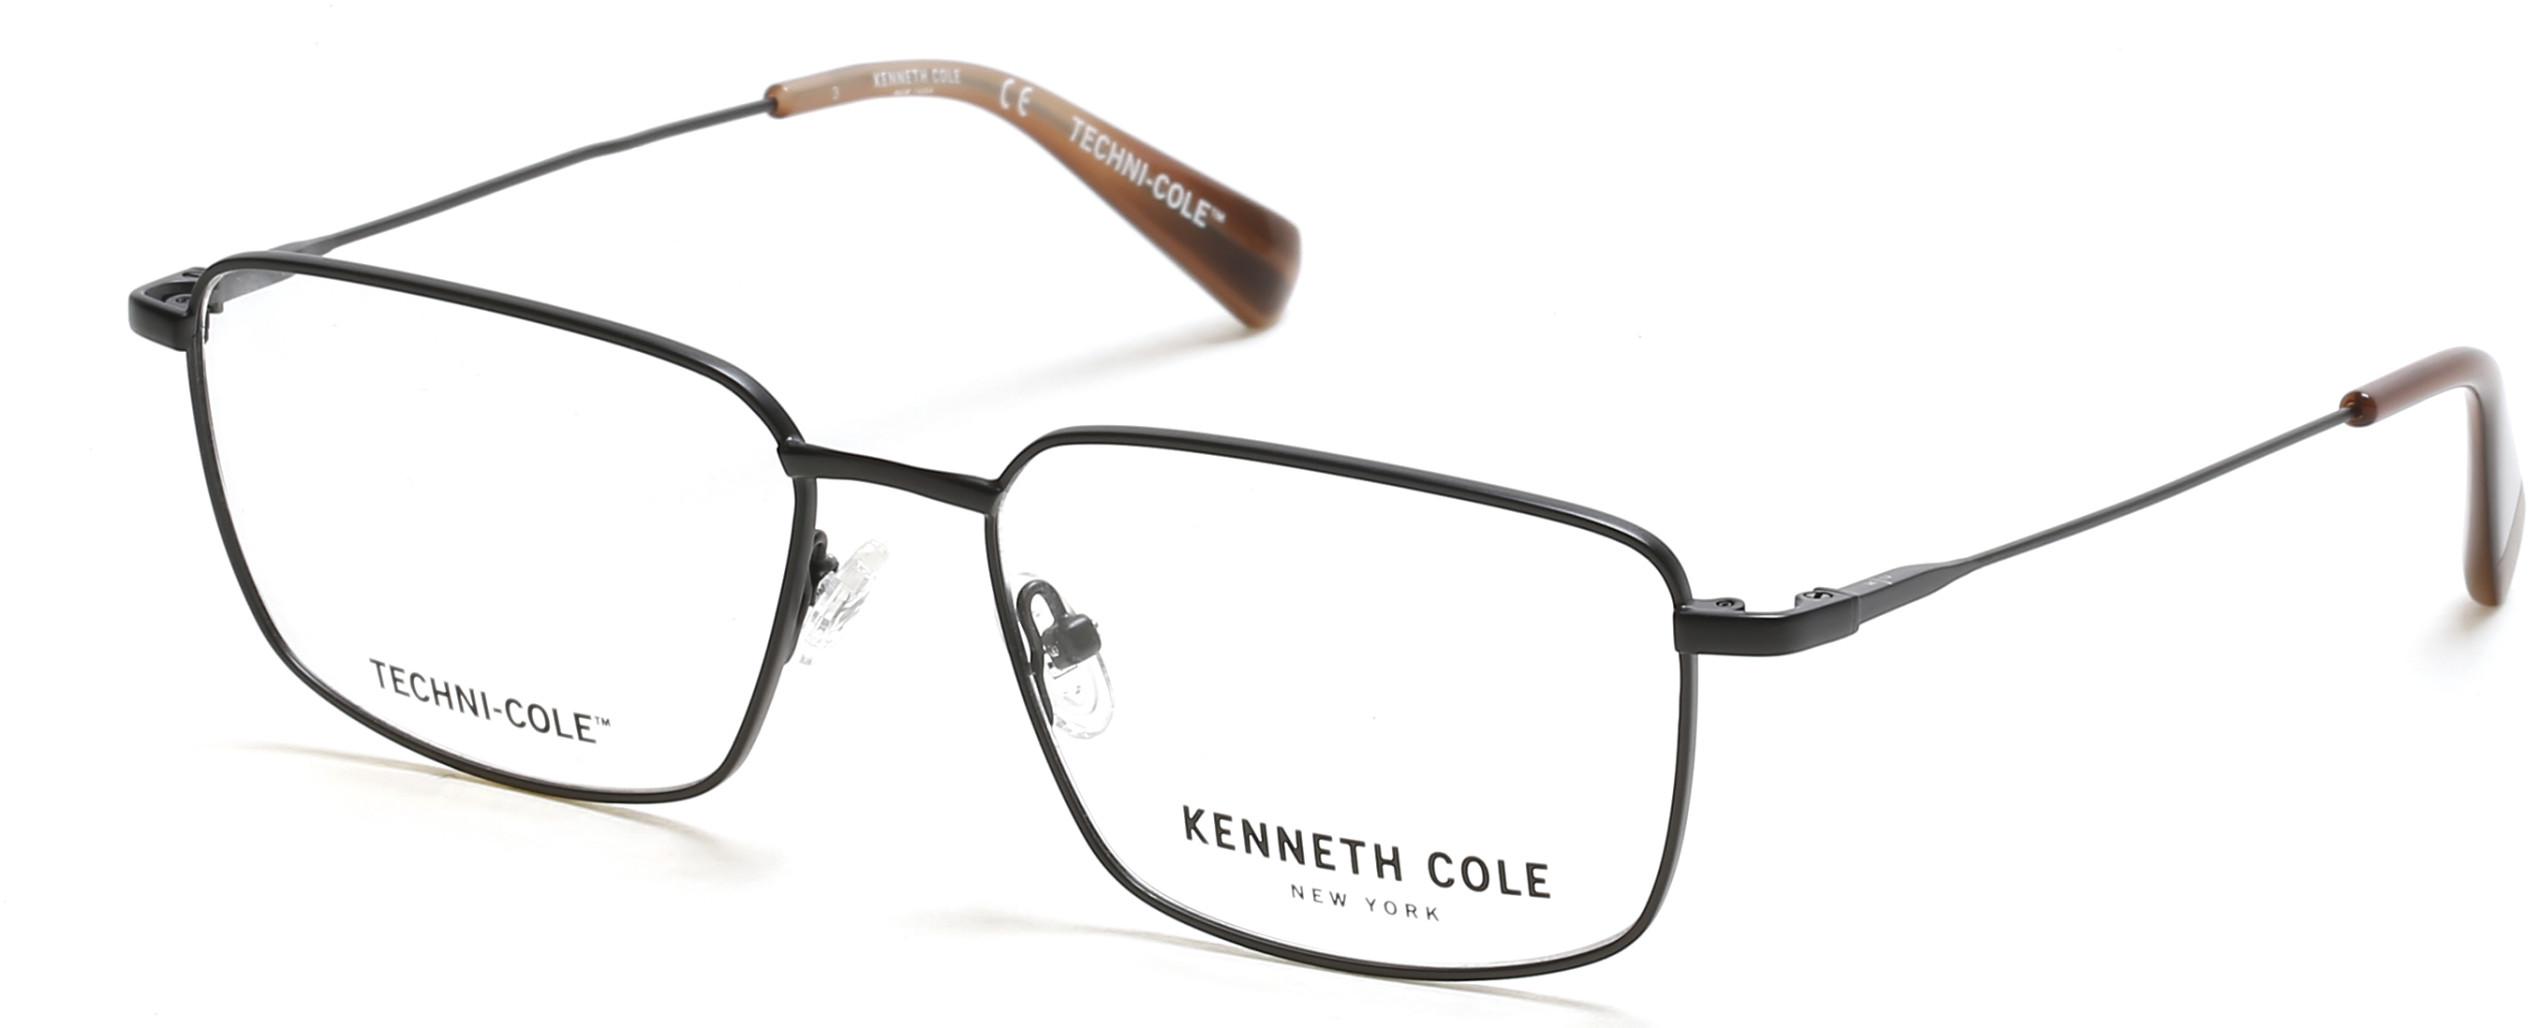 KENNETH COLE NY 0331